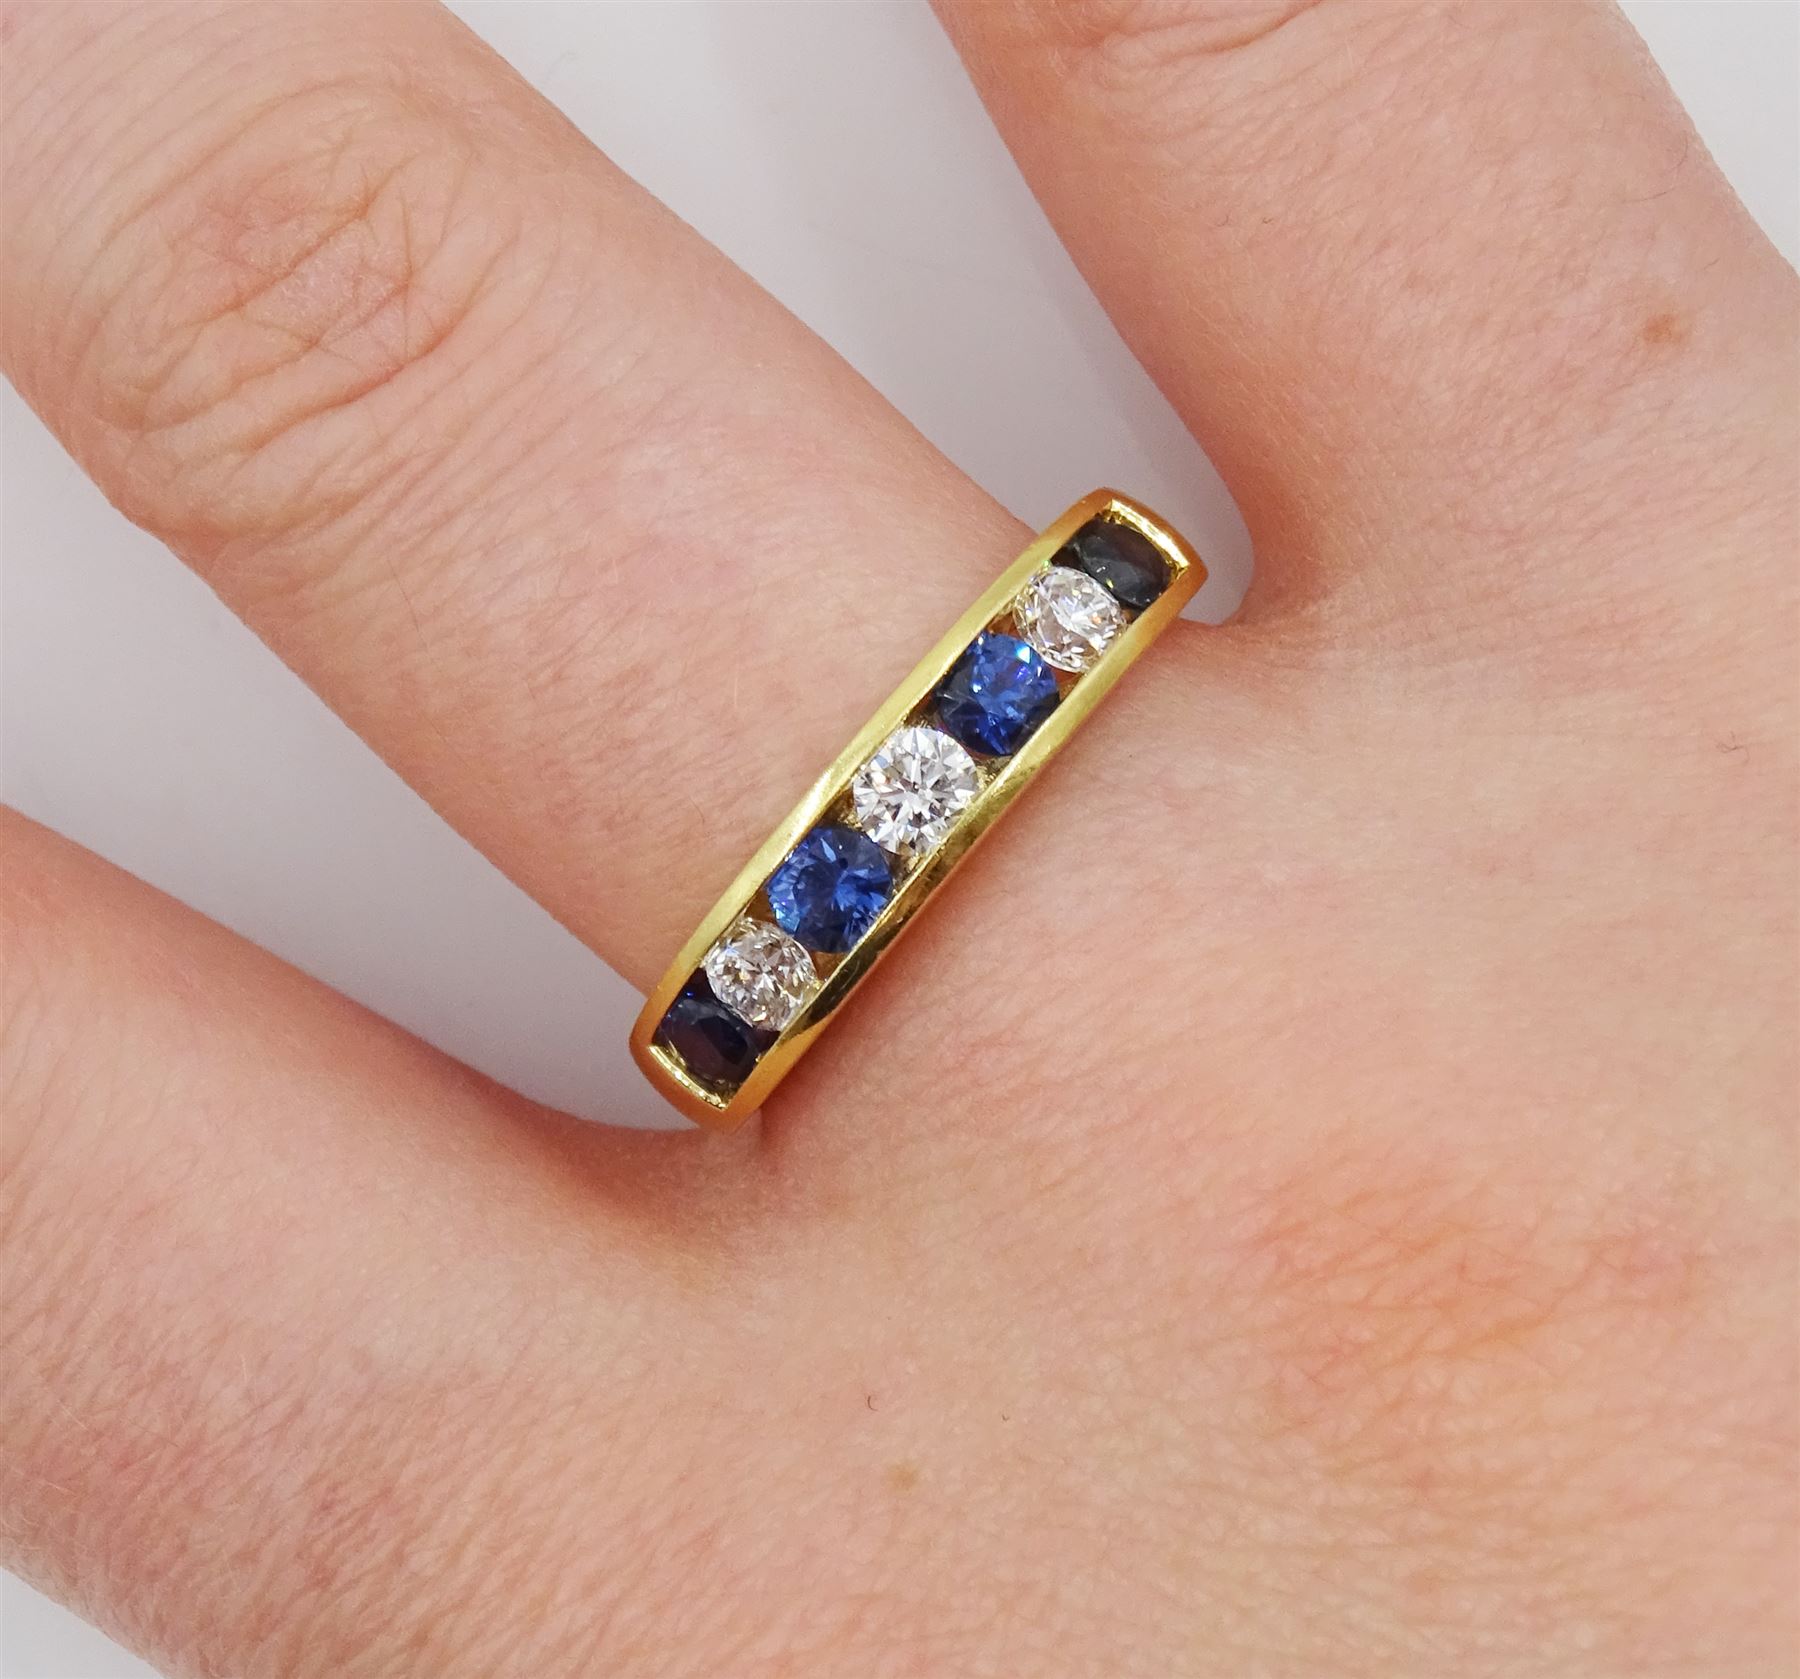 18ct gold channel set seven stone round brilliant cut diamond and round sapphire ring - Image 2 of 4